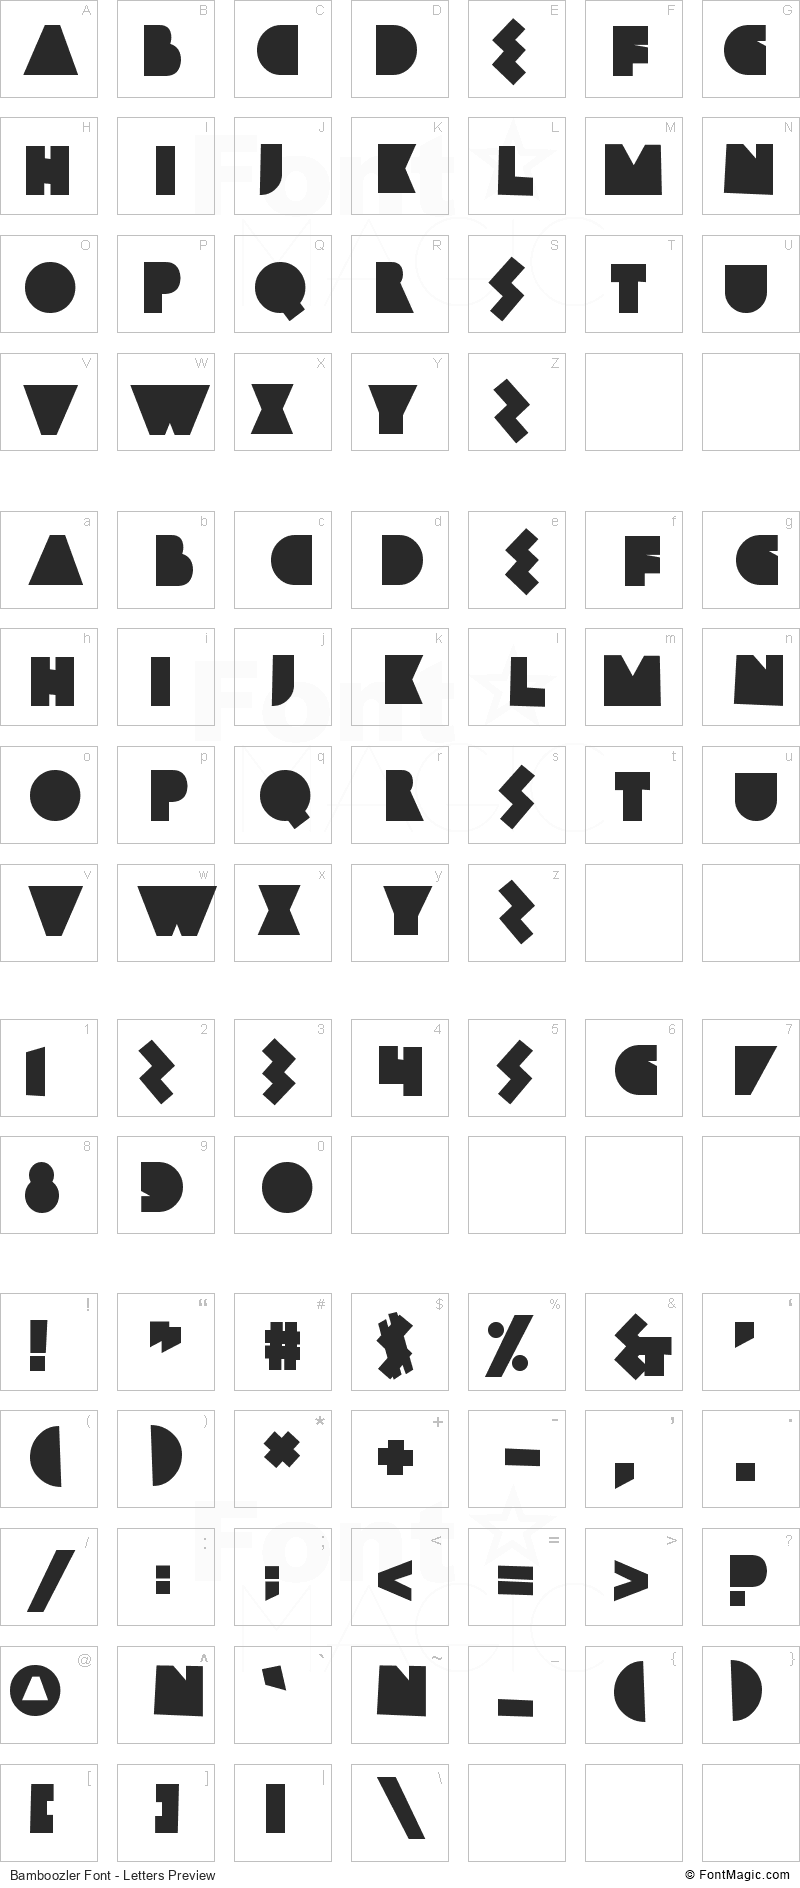 Bamboozler Font - All Latters Preview Chart